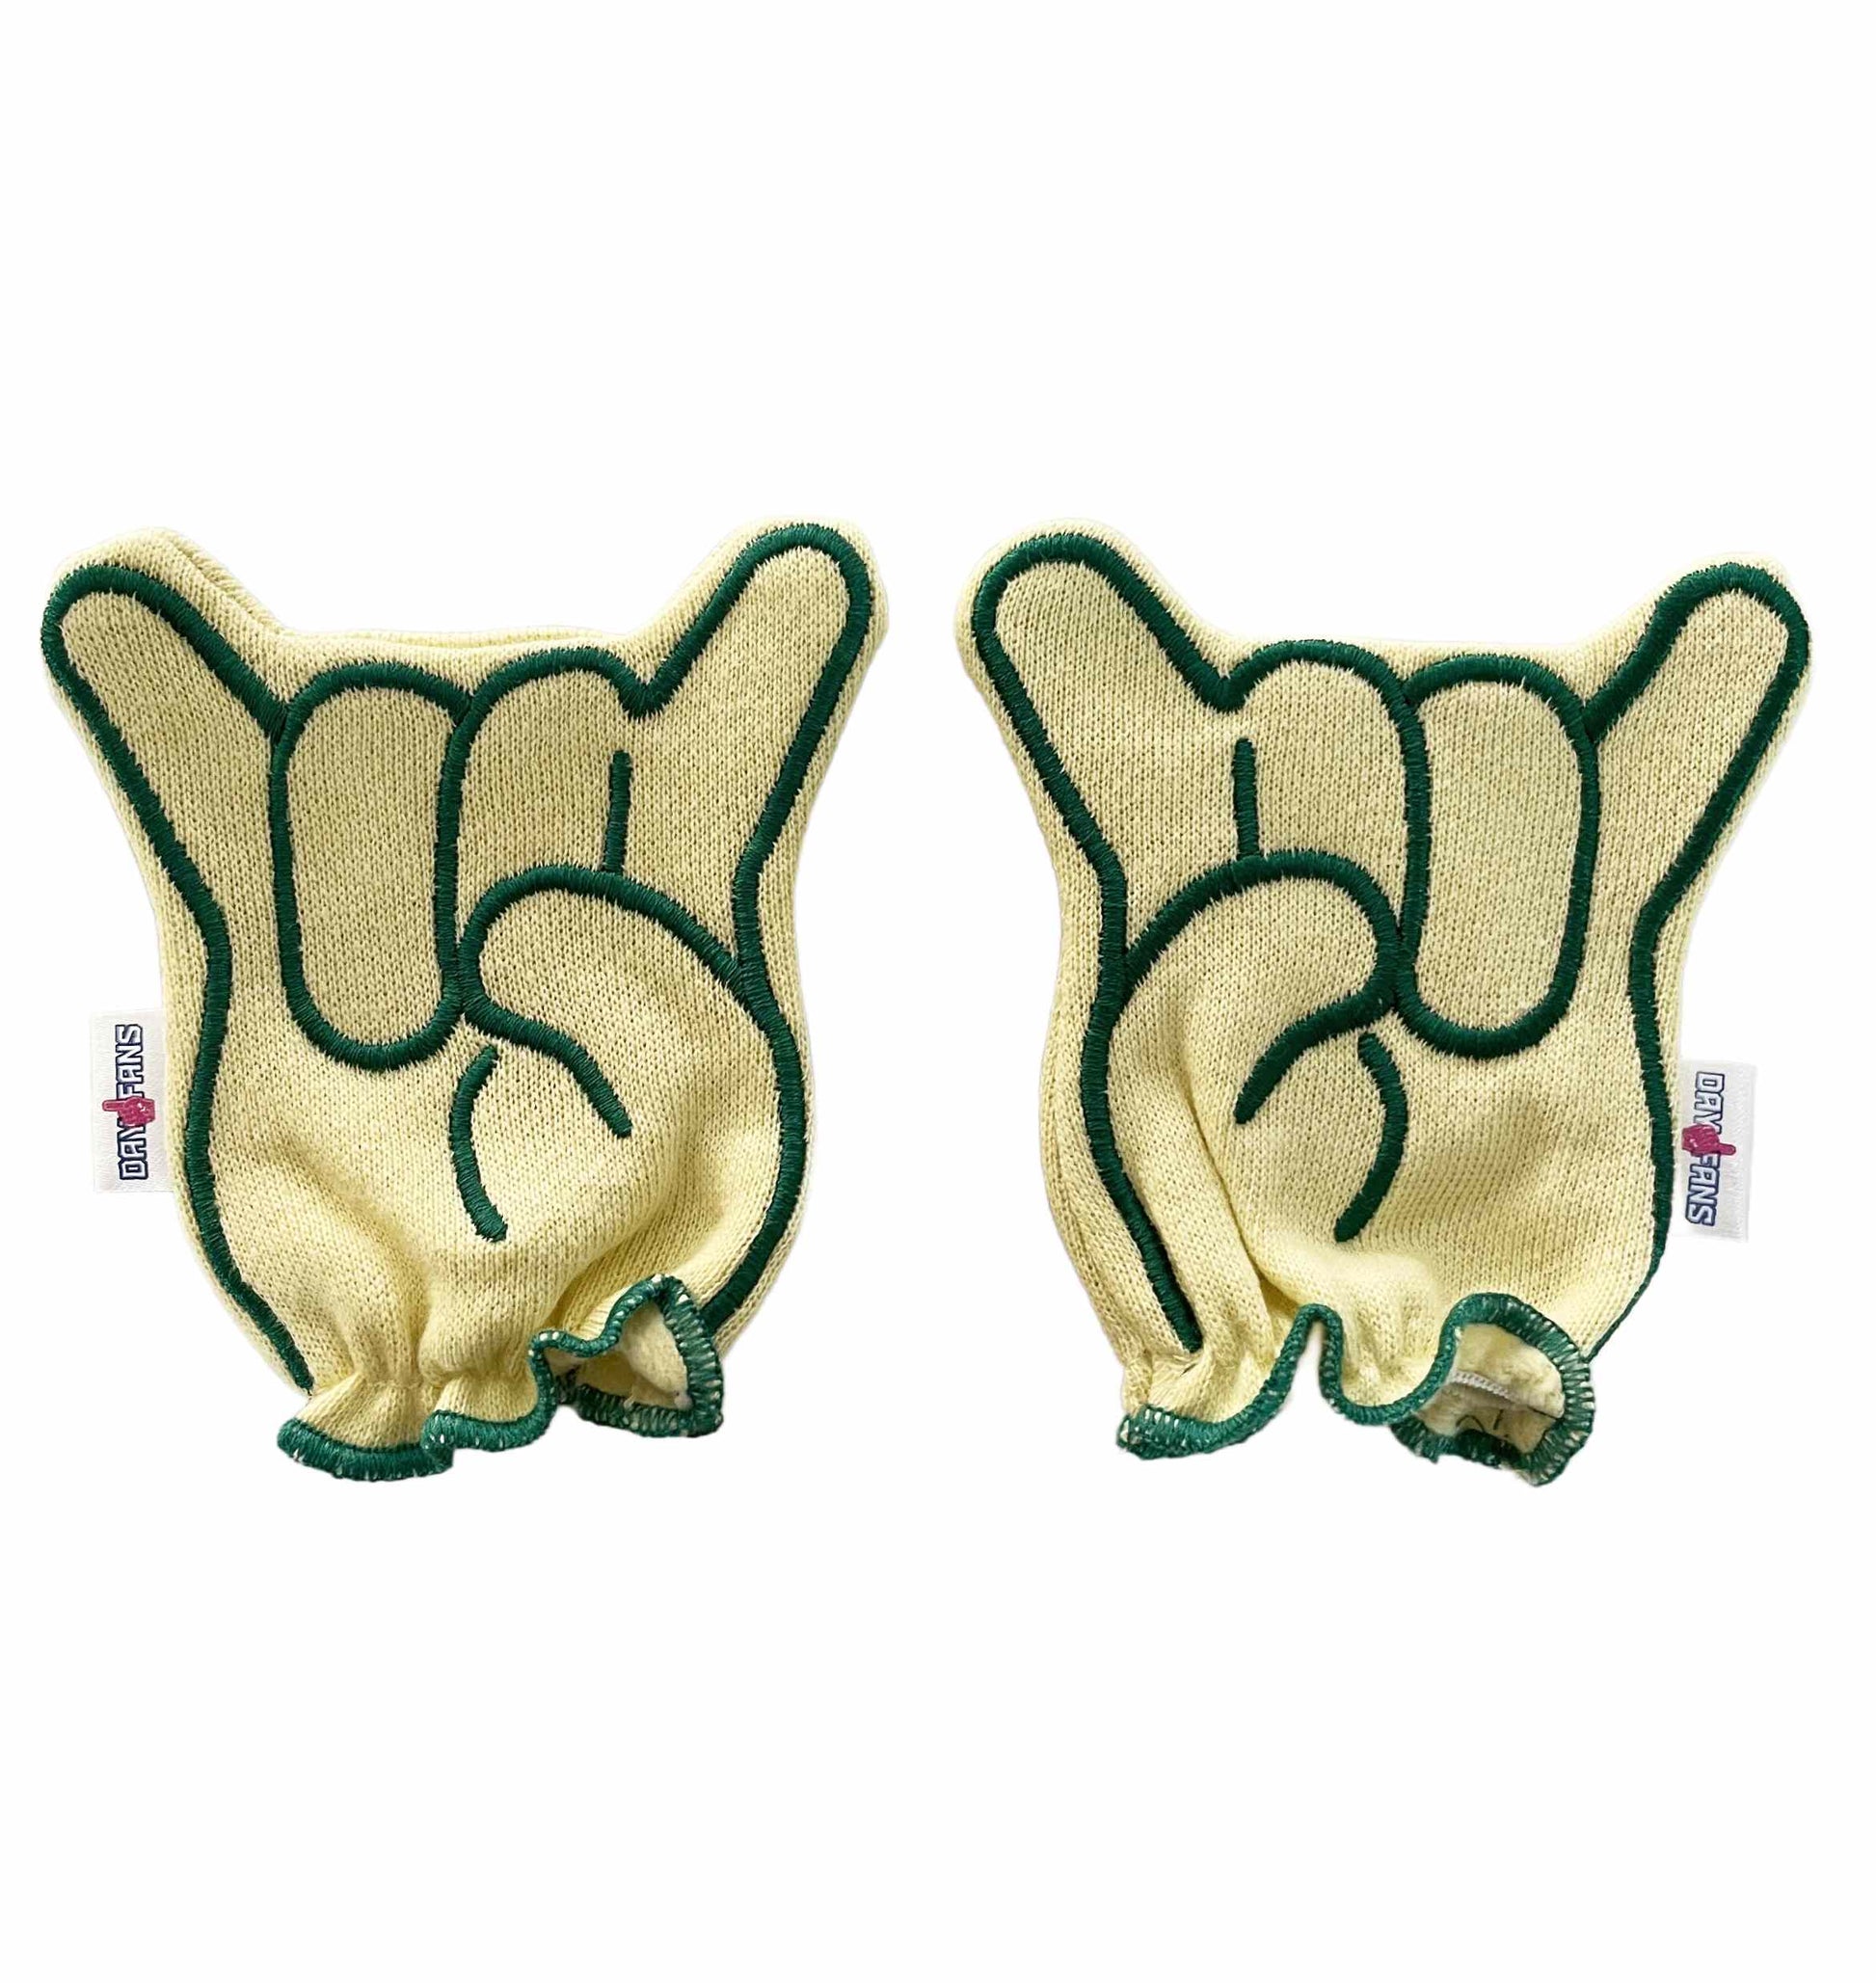 USF Go Bulls FanMitts Baby Mittens Gold Front Pair